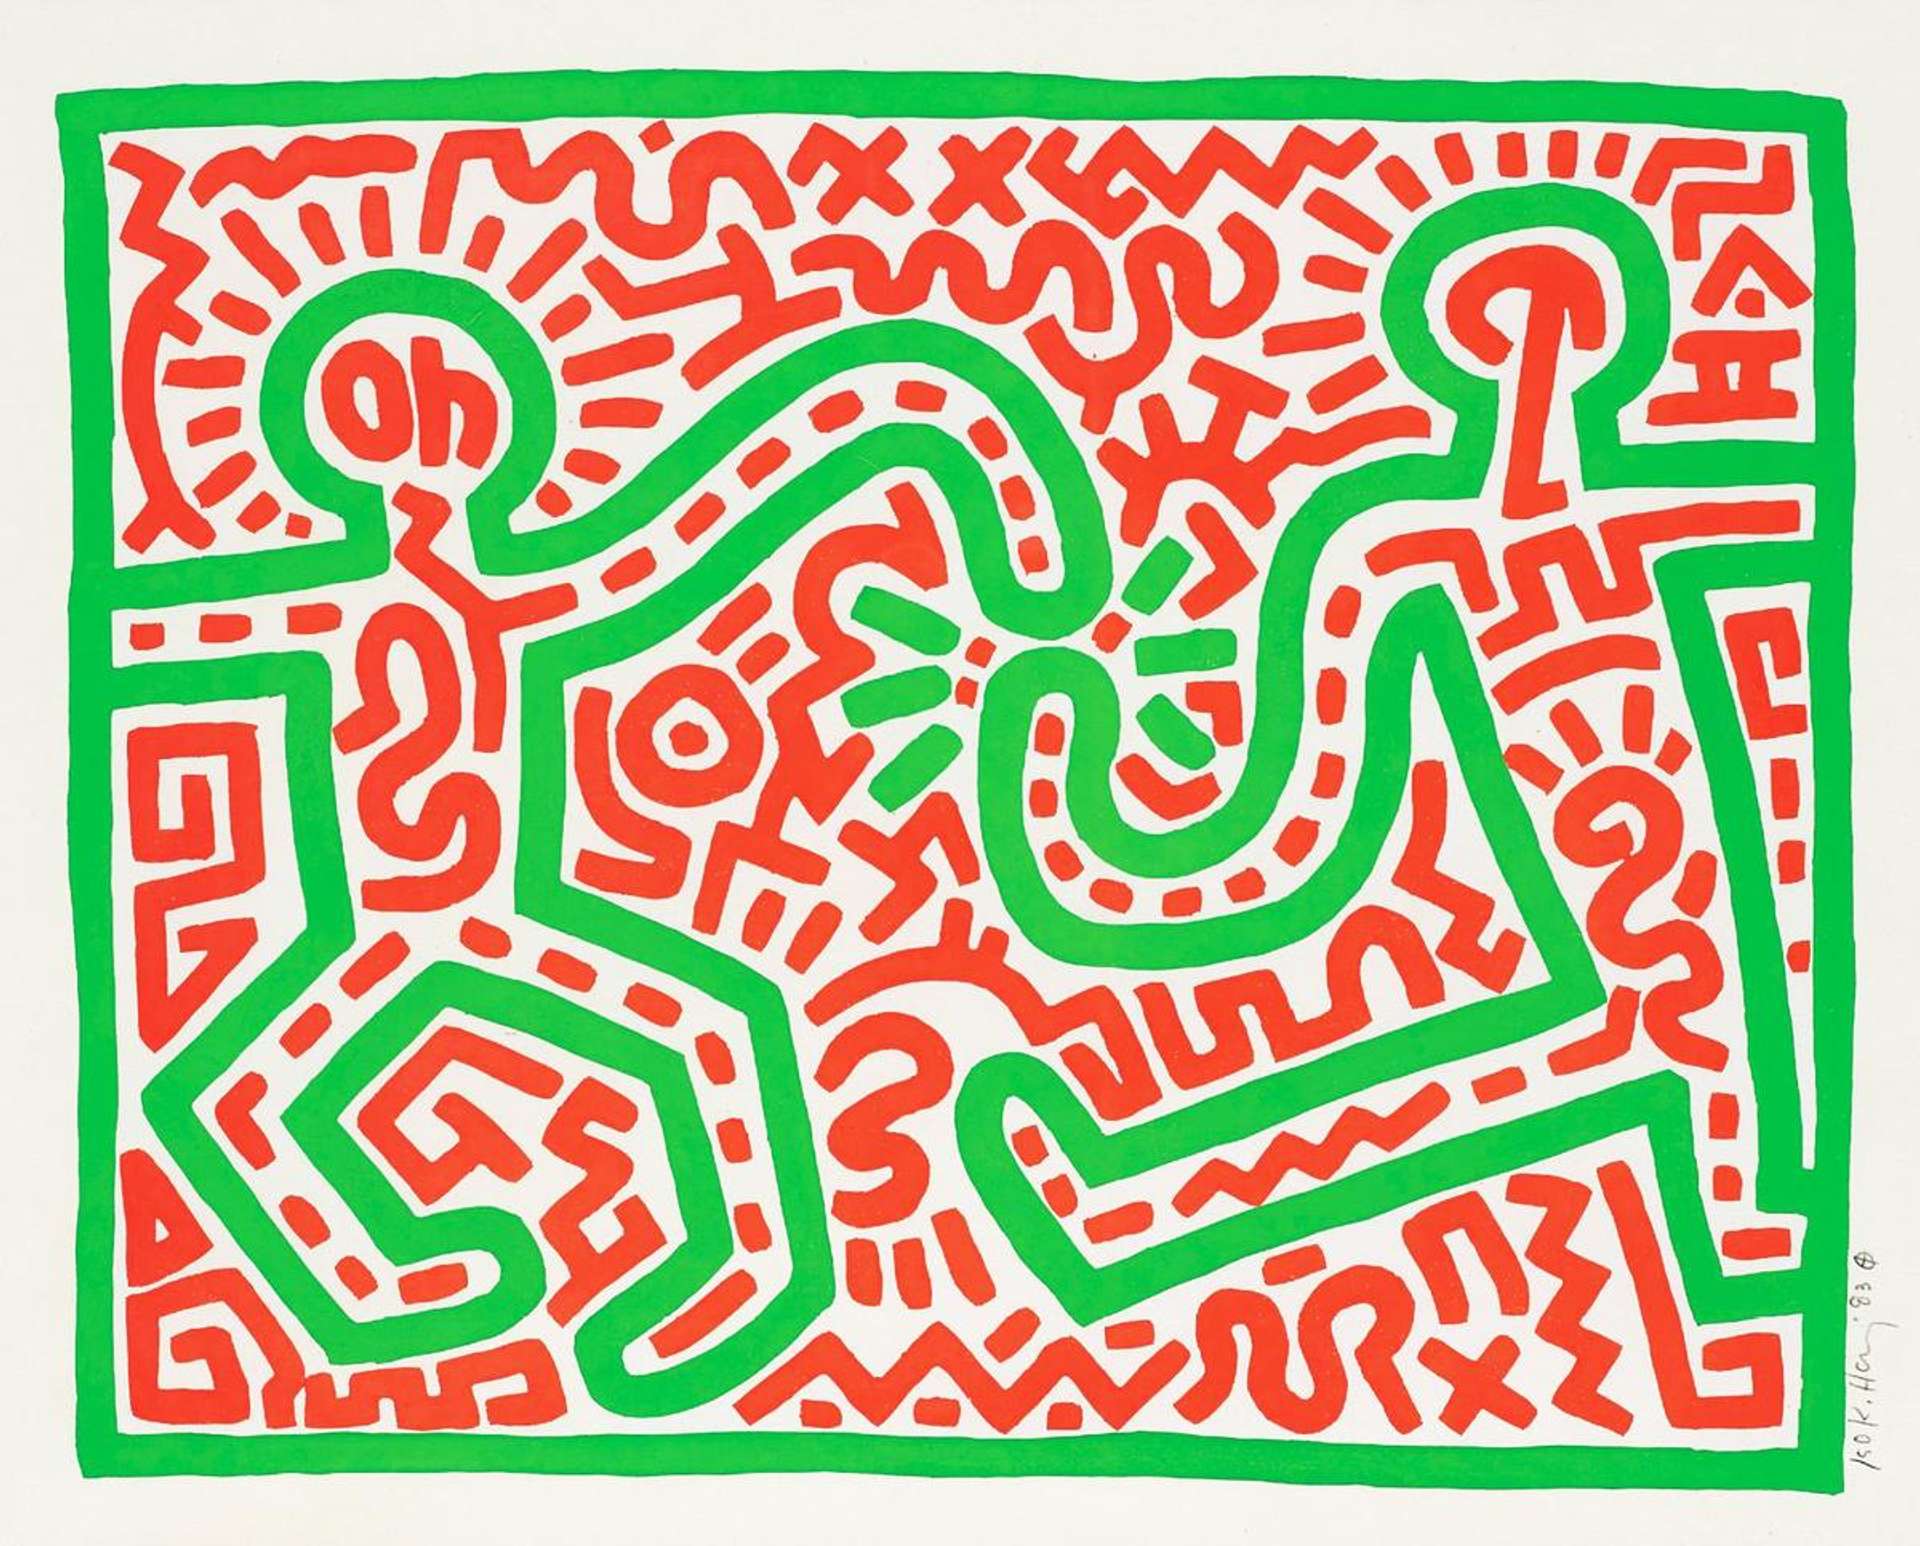 Untitled 1983 - Signed Print by Keith Haring 1983 - MyArtBroker